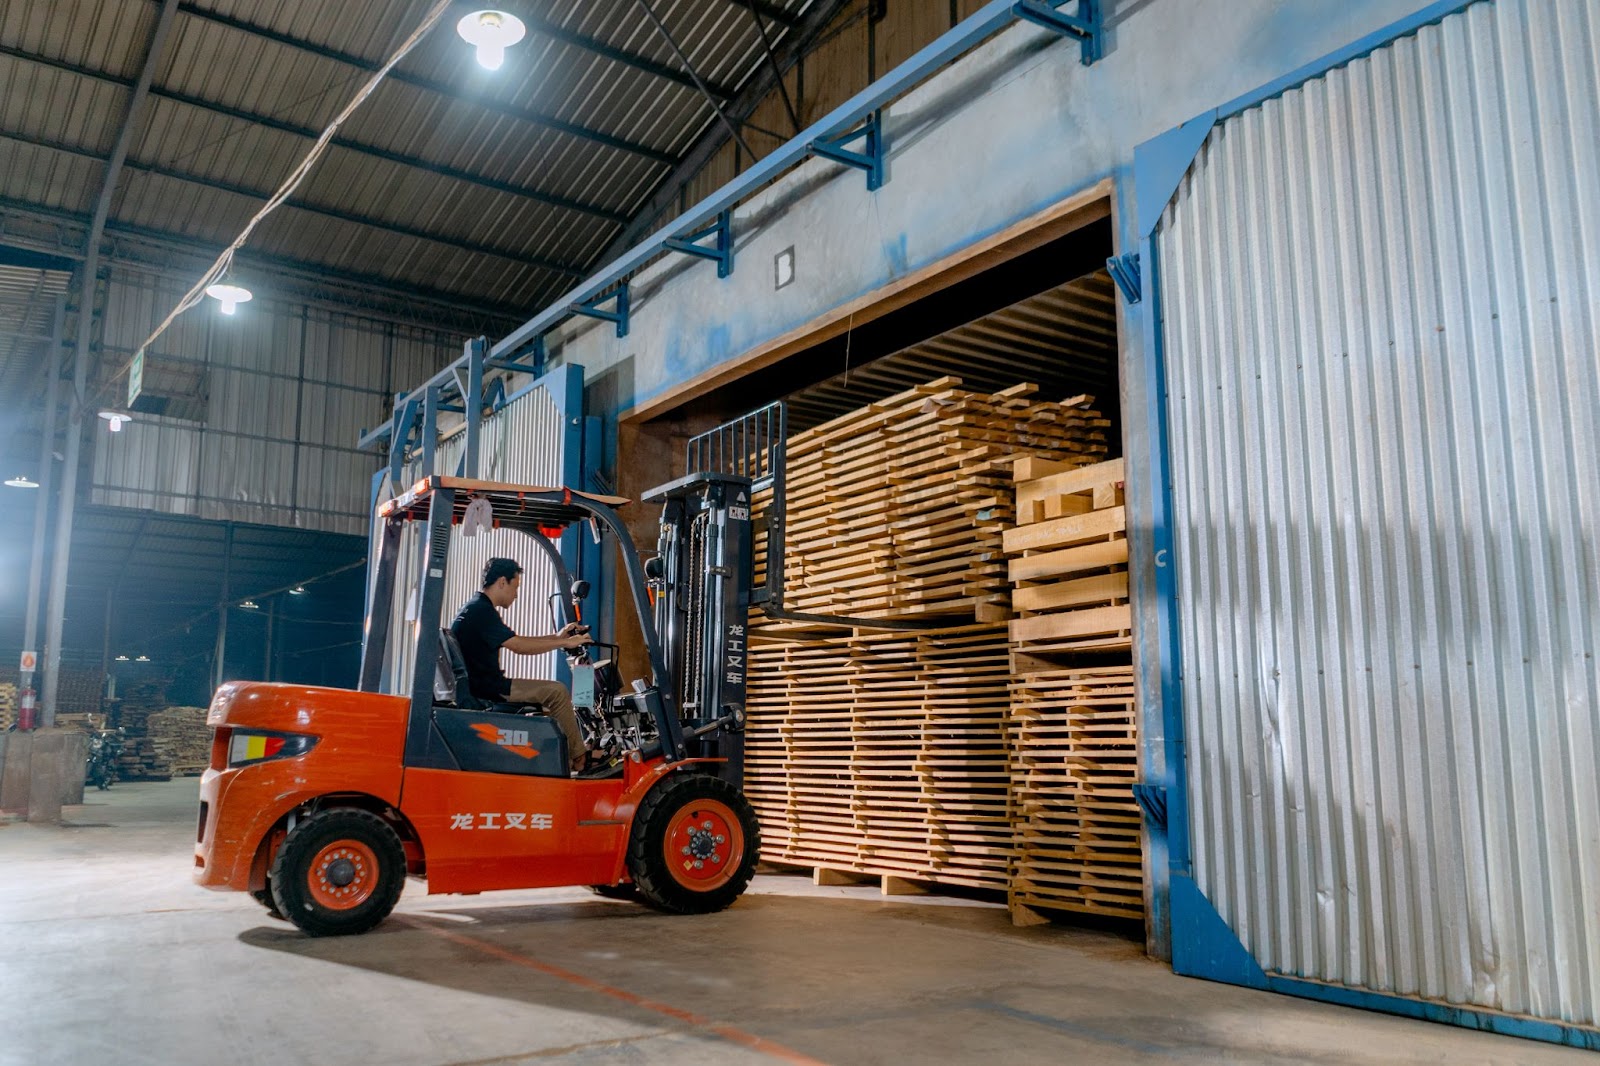 A forklift driver lifting stacks of wood pallets in a warehouse